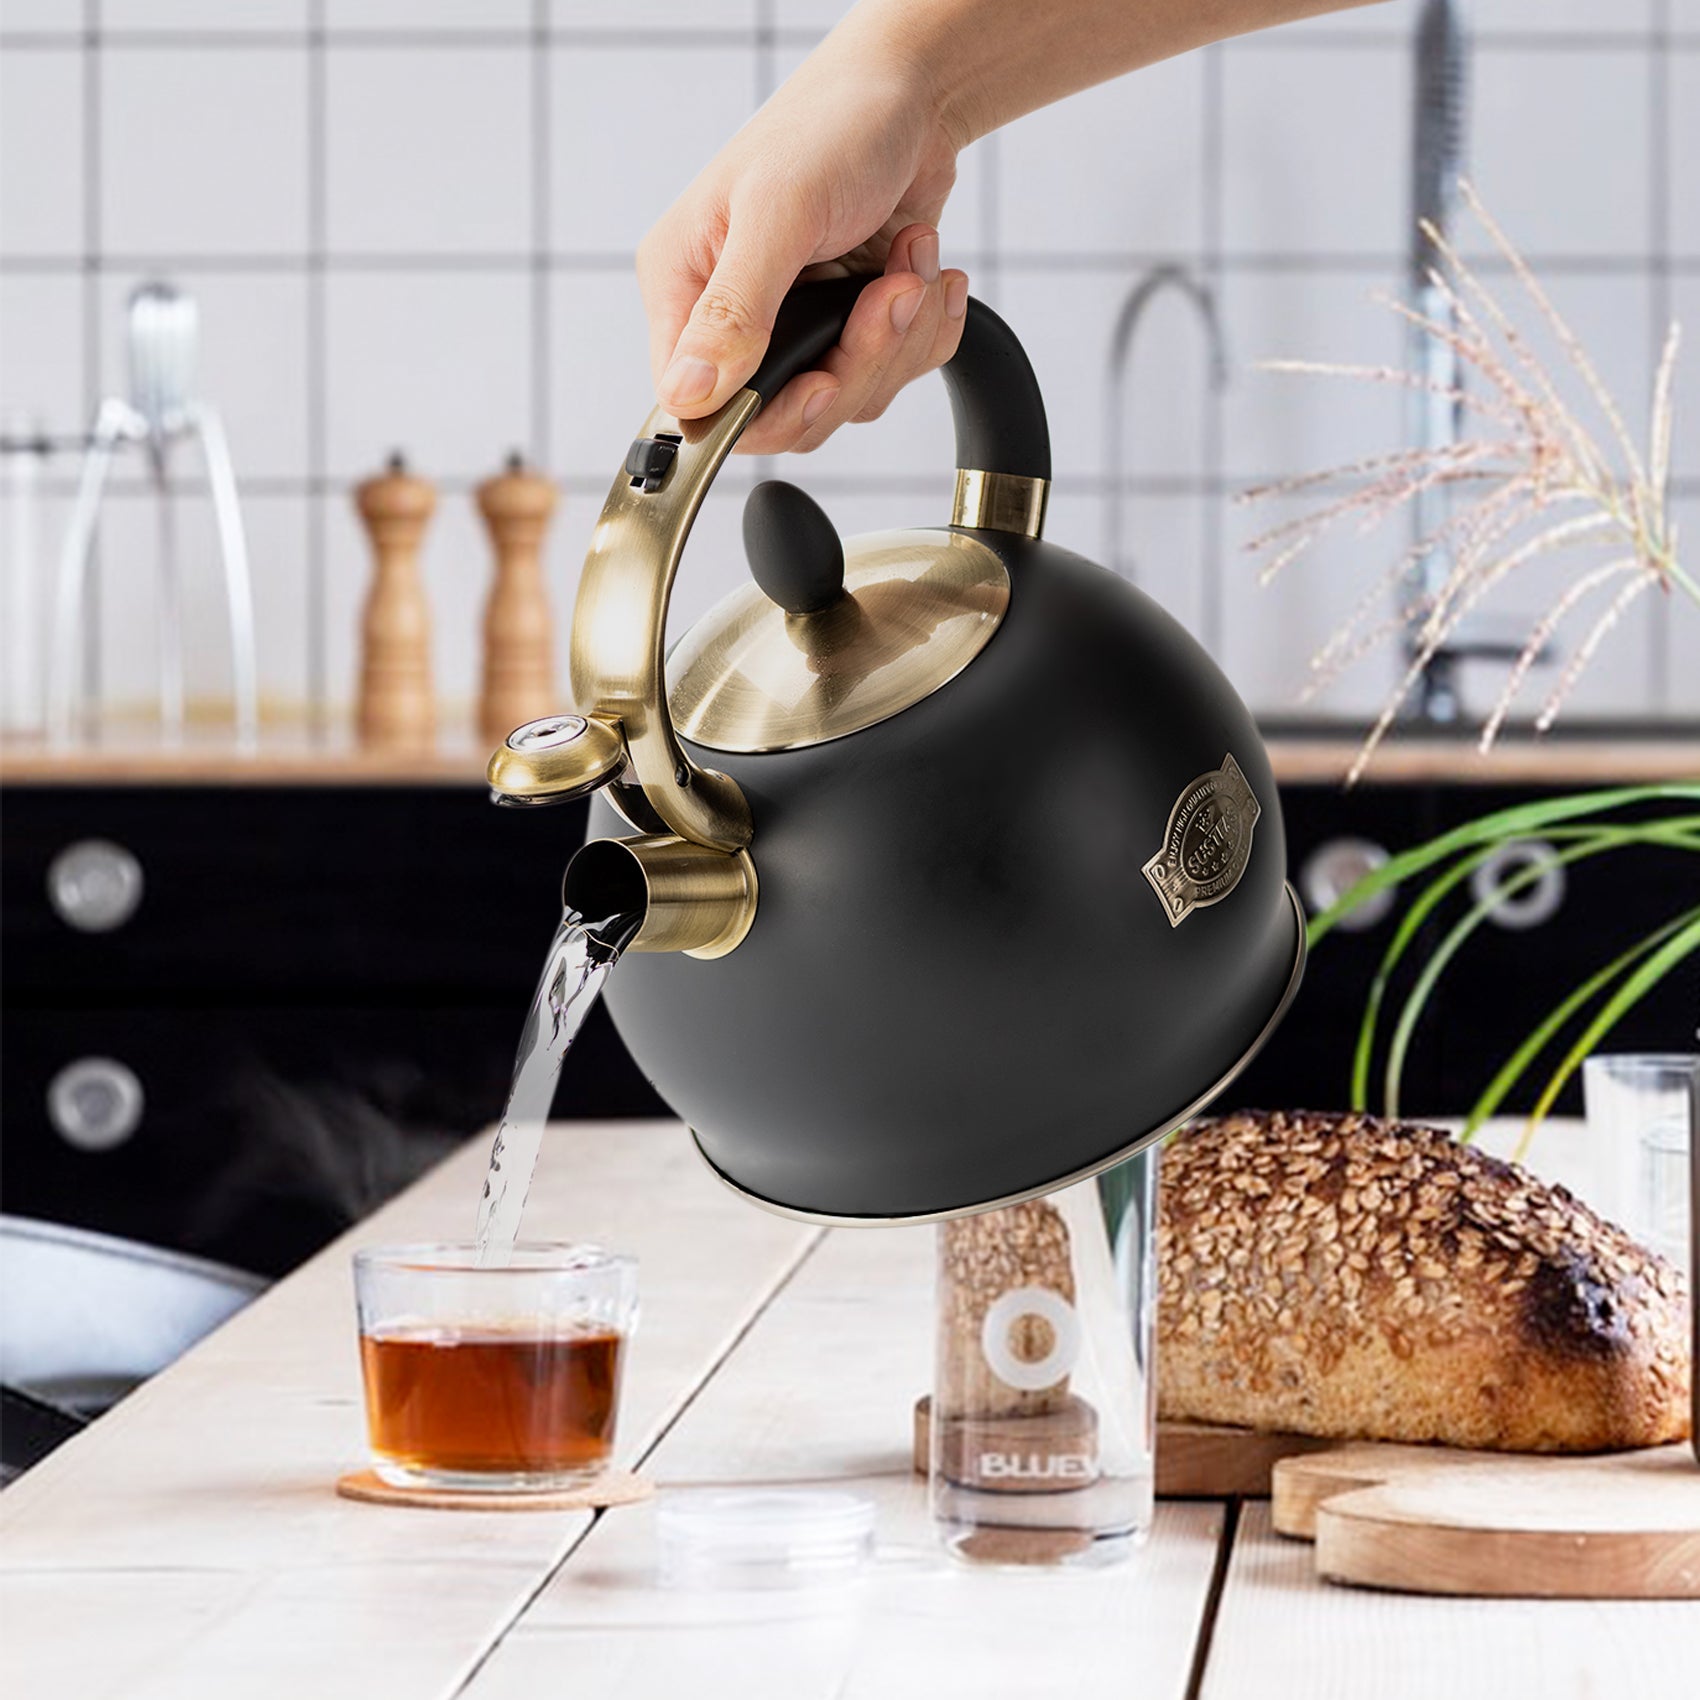  SUSTEAS Stove Top Whistling Tea Kettle-Surgical Stainless Steel Teakettle  Teapot with Cool Touch Ergonomic Handle,1 Free Silicone Pinch Mitt  Included,2.64 Quart(SILVER): Home & Kitchen